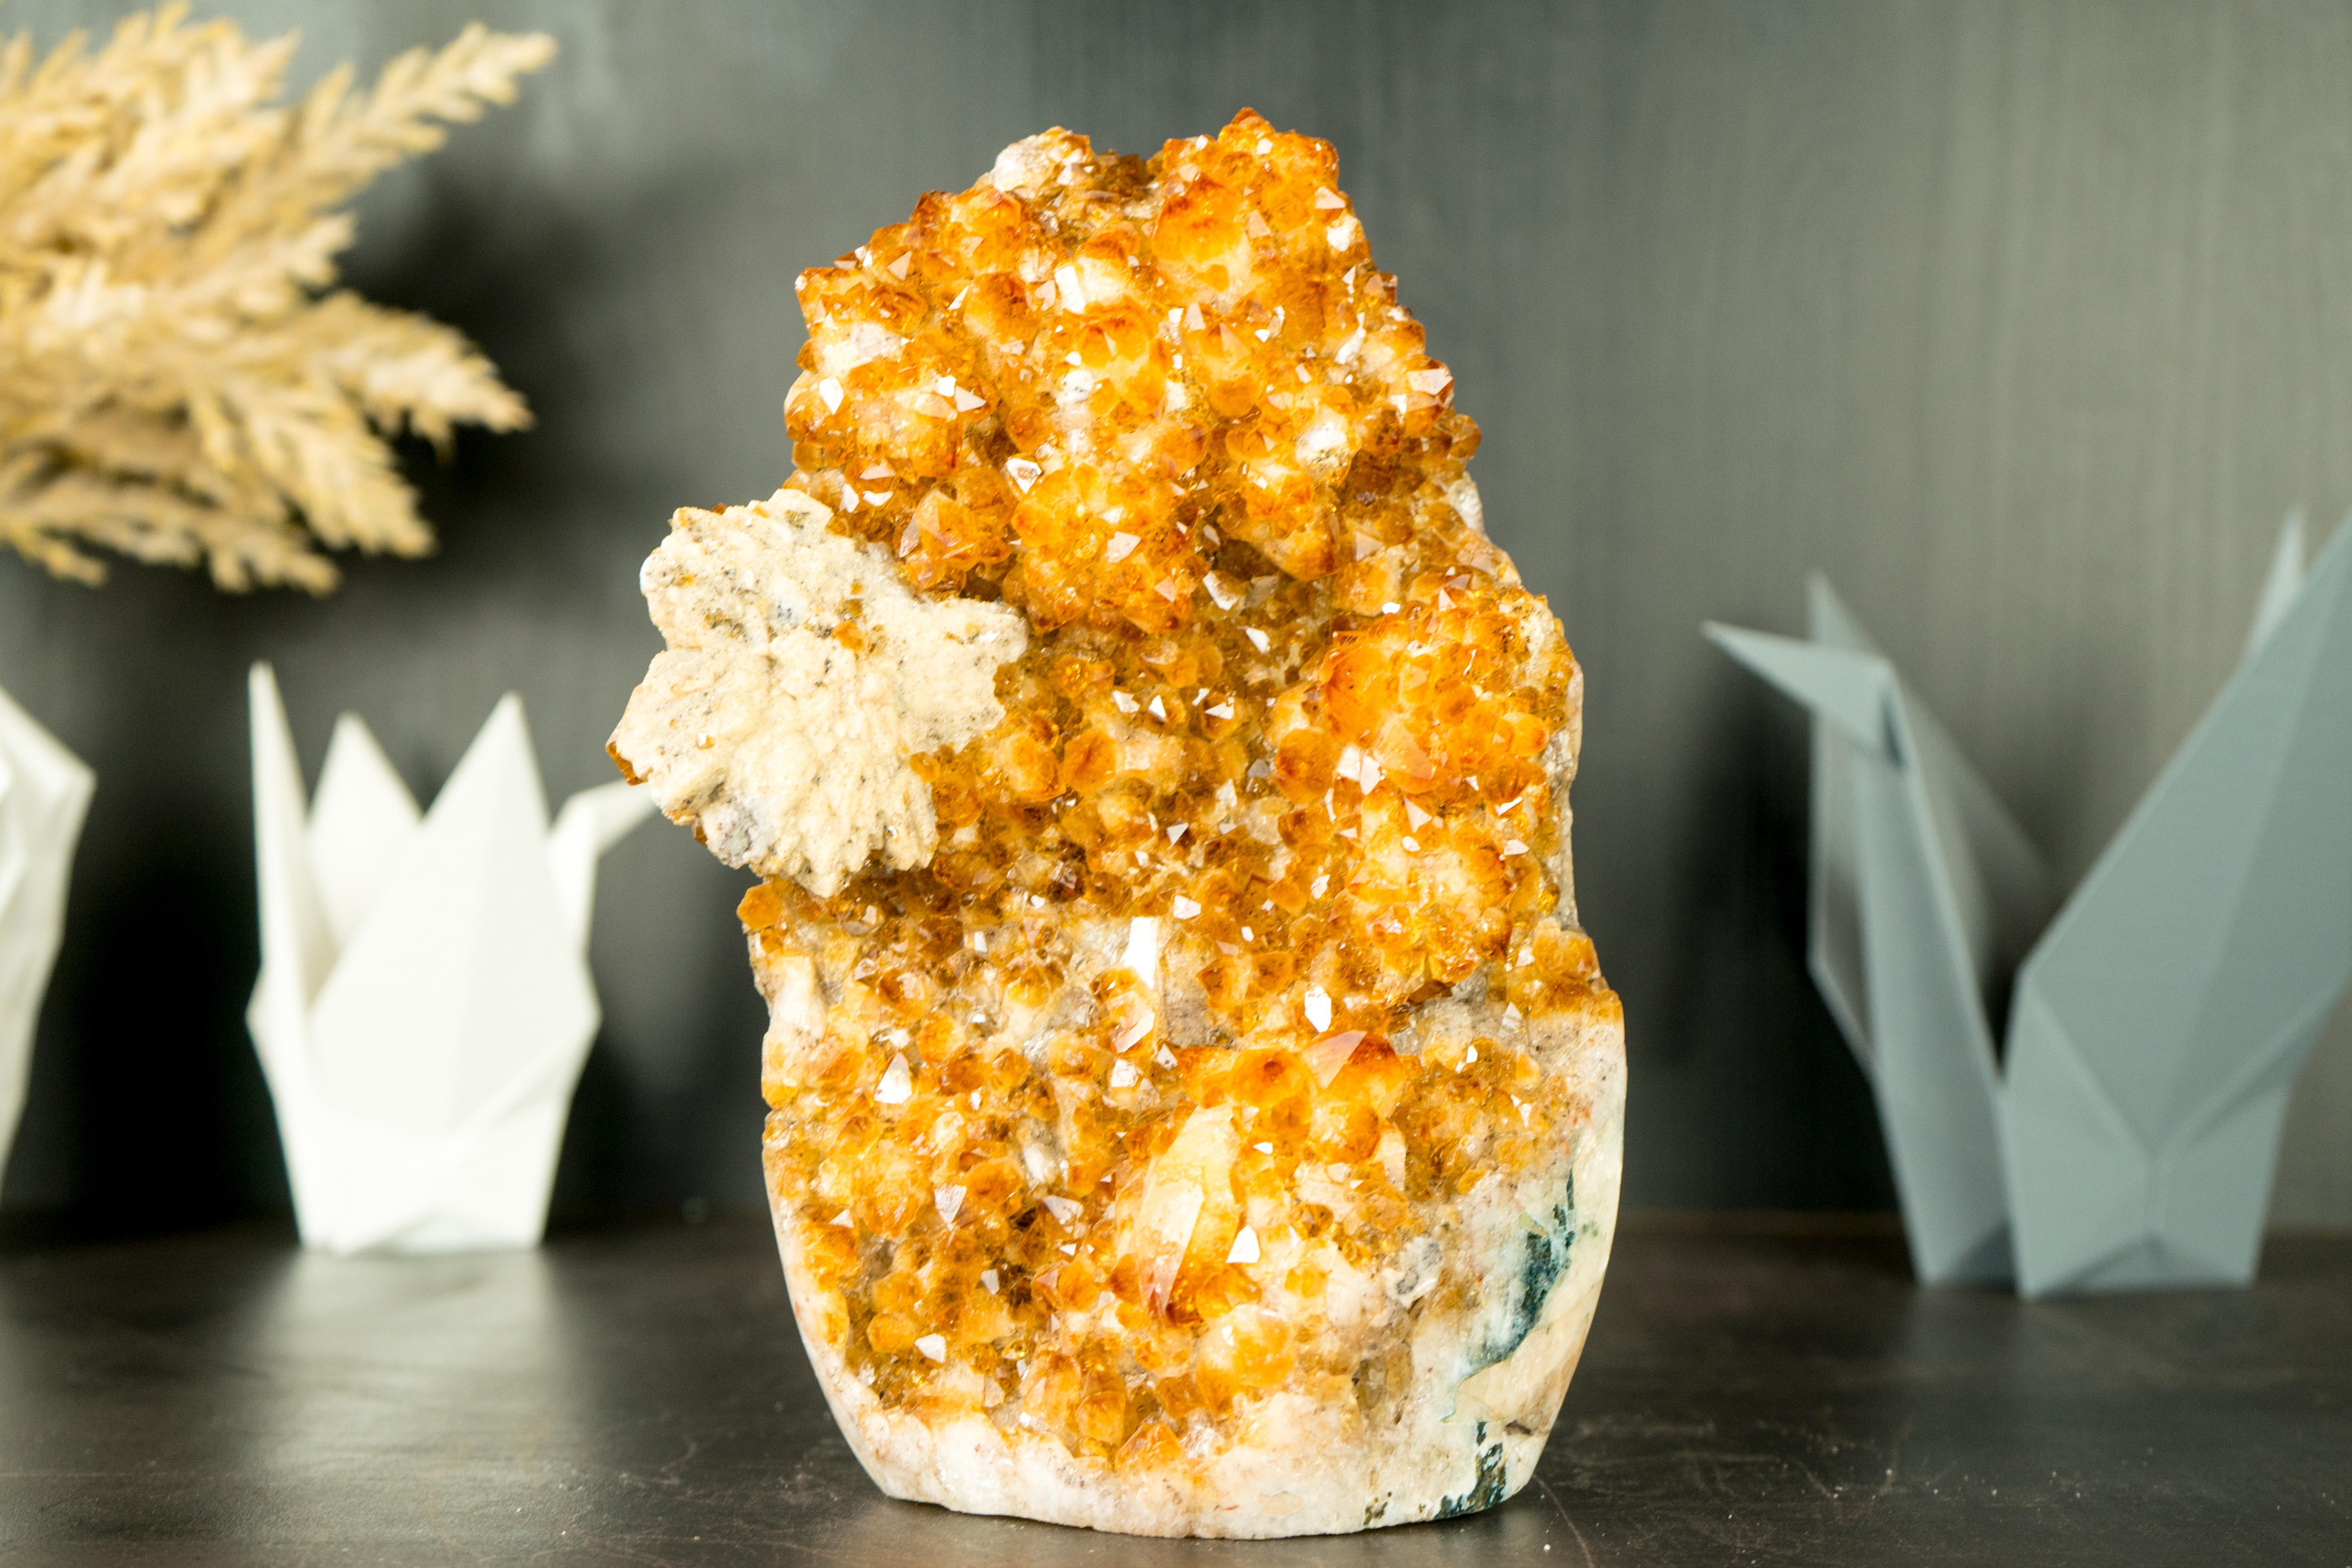 Citrine Cluster with Rich Amber Citrine Druzy and Calcite Flower

▫️ Description

A Citrine with world-class citrine color tones, high-grade druzy, and an aesthetical calcite flower inclusion, this small yet gorgeous crystal promises to be a